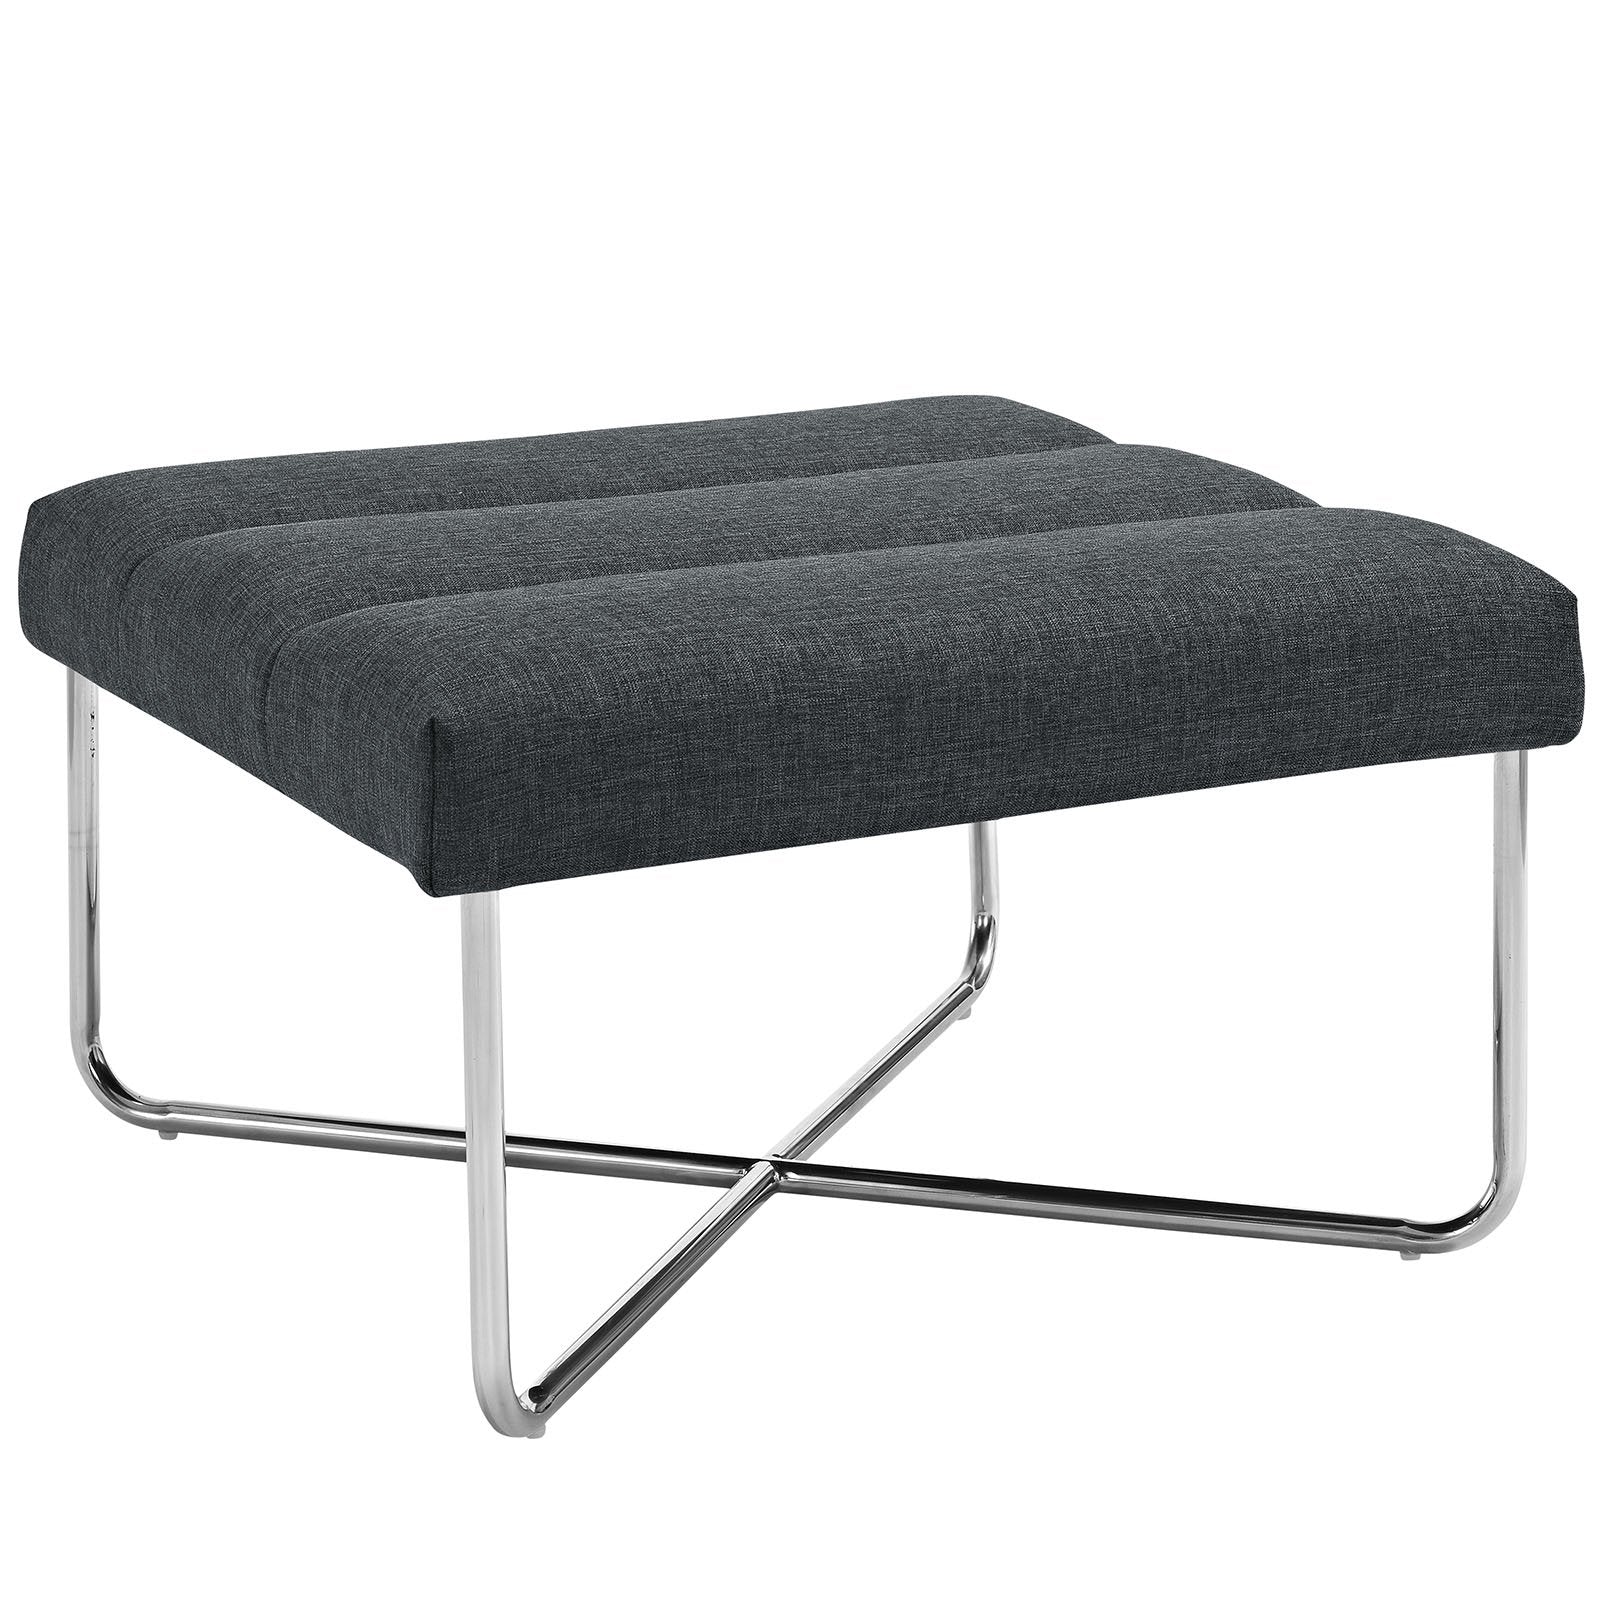 Modern Black Tufted And Silver Steel Ottoman In Fabric- Square Reach Upholstered Ottoman Coffee Table In Black With Footcaps